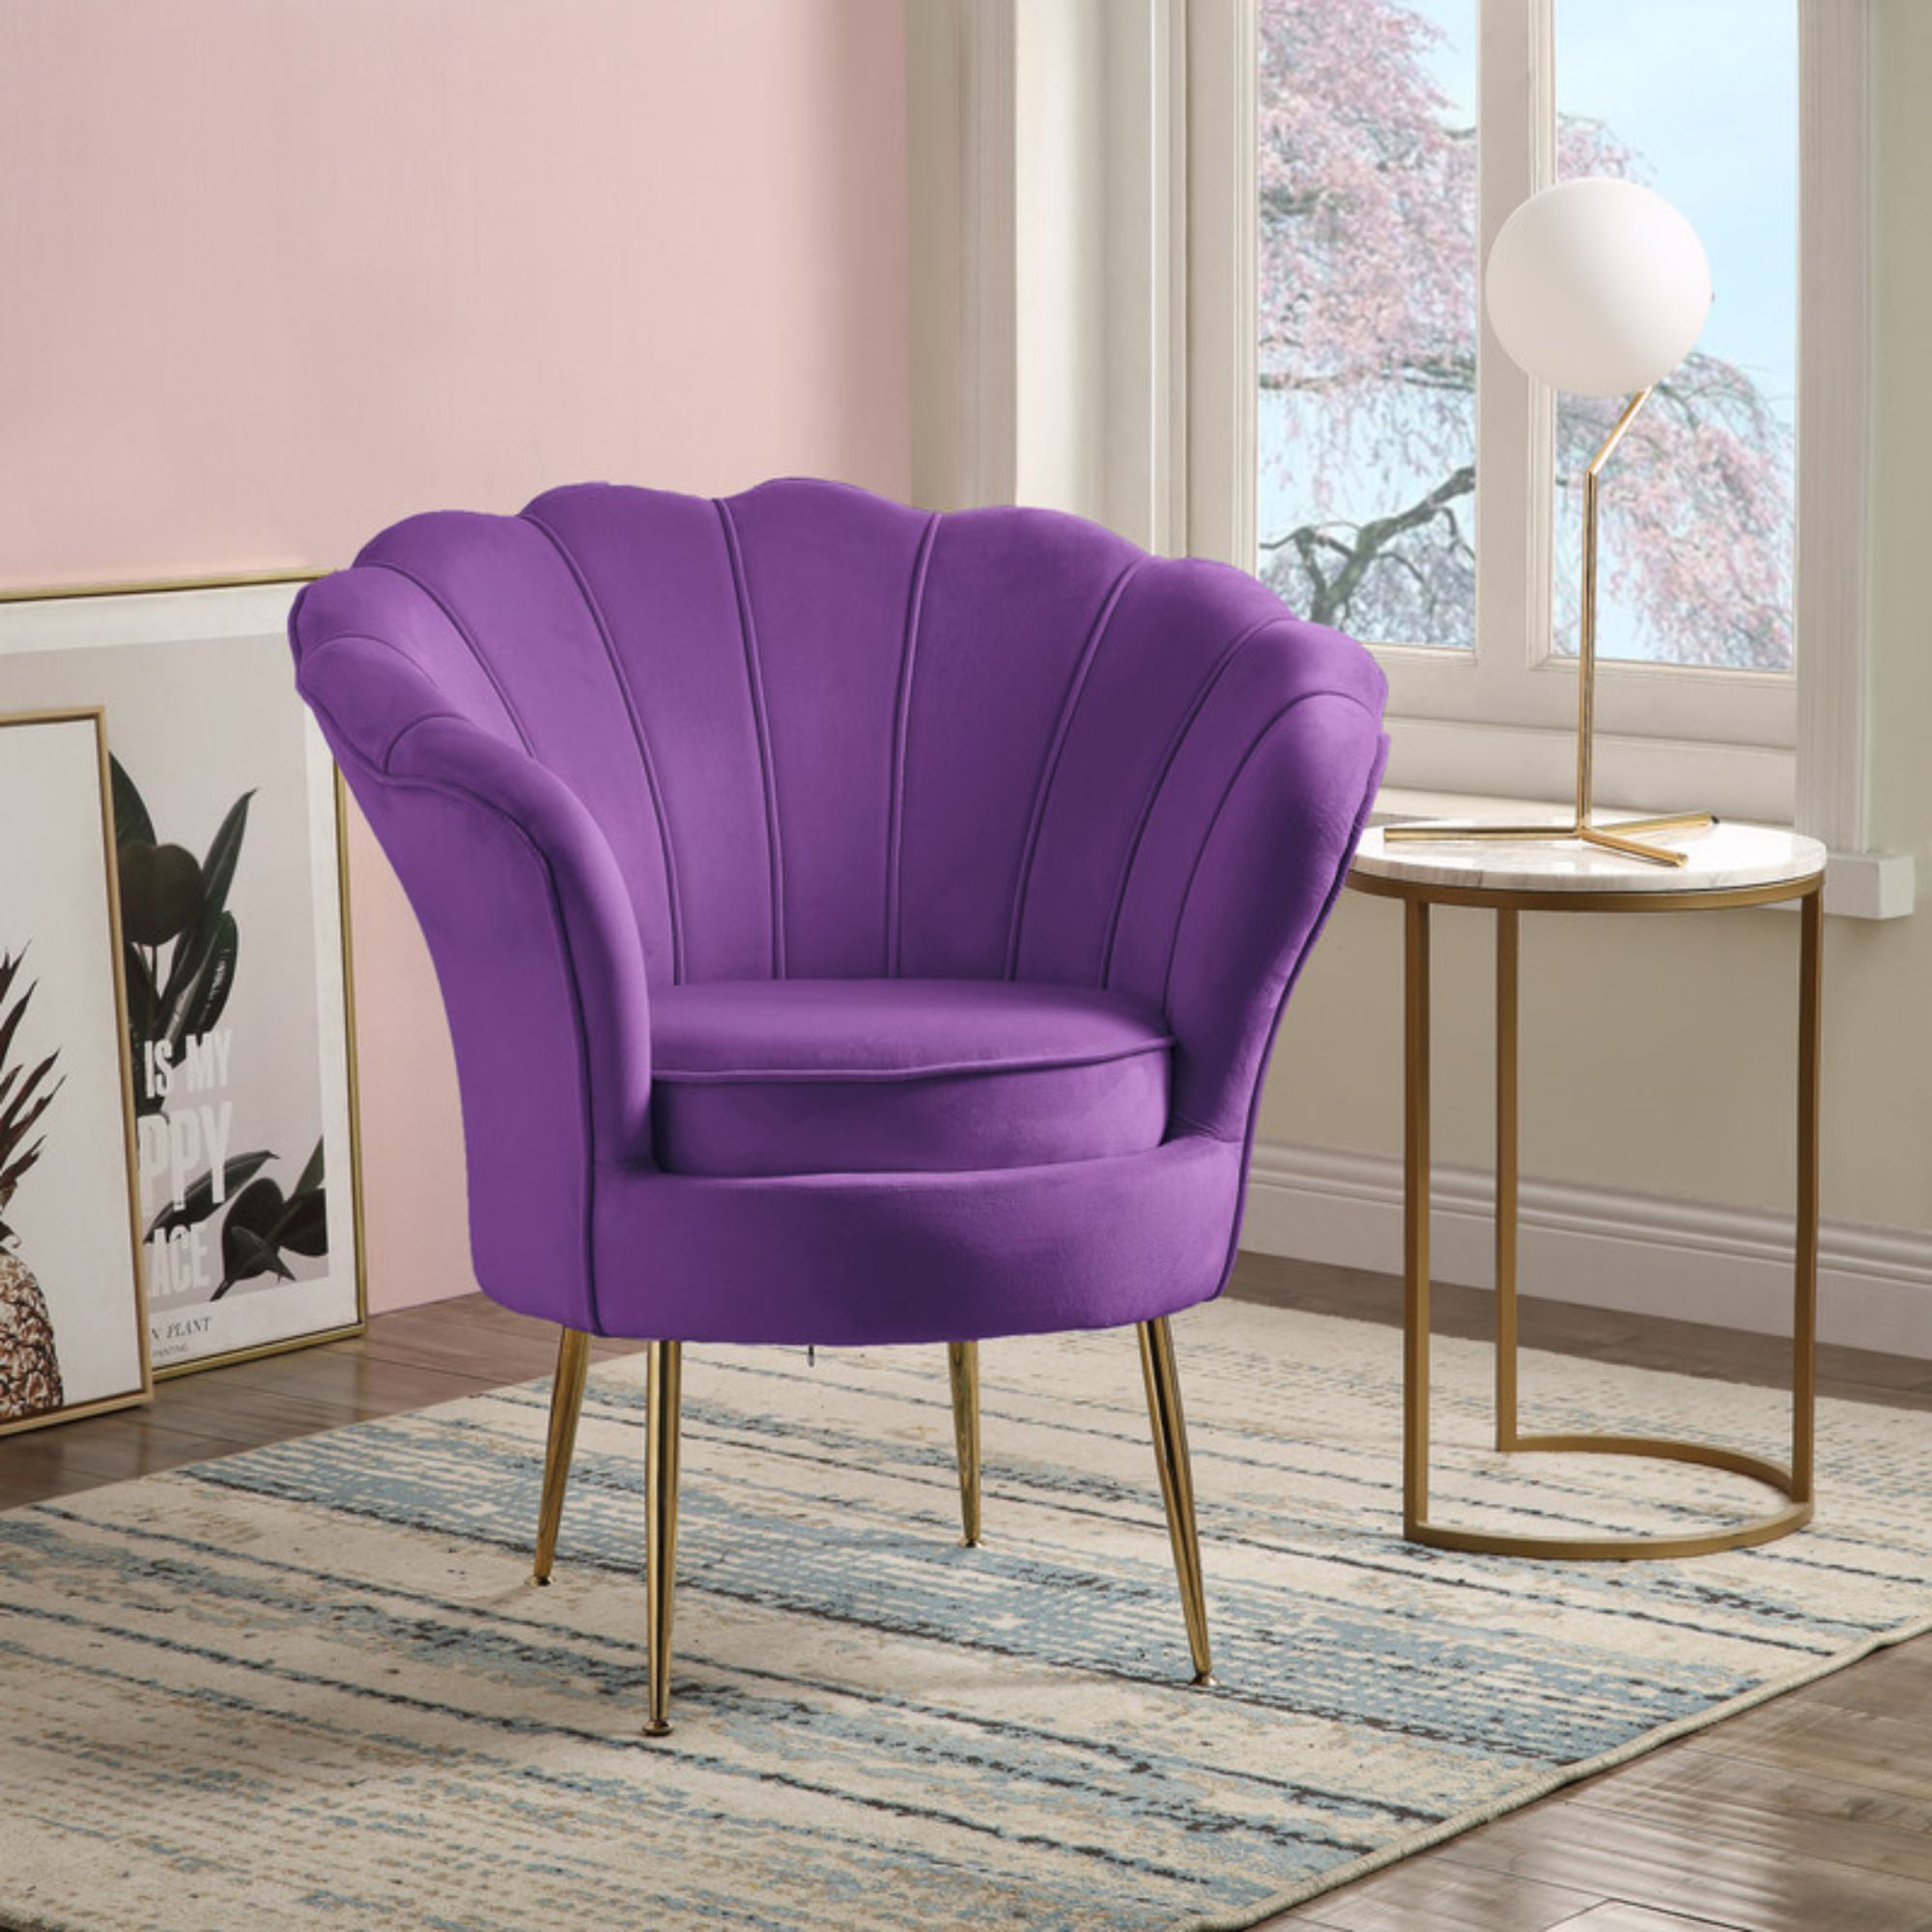 34" Angelina Purple Velvet Scalloped Back Barrel Accent Chair with